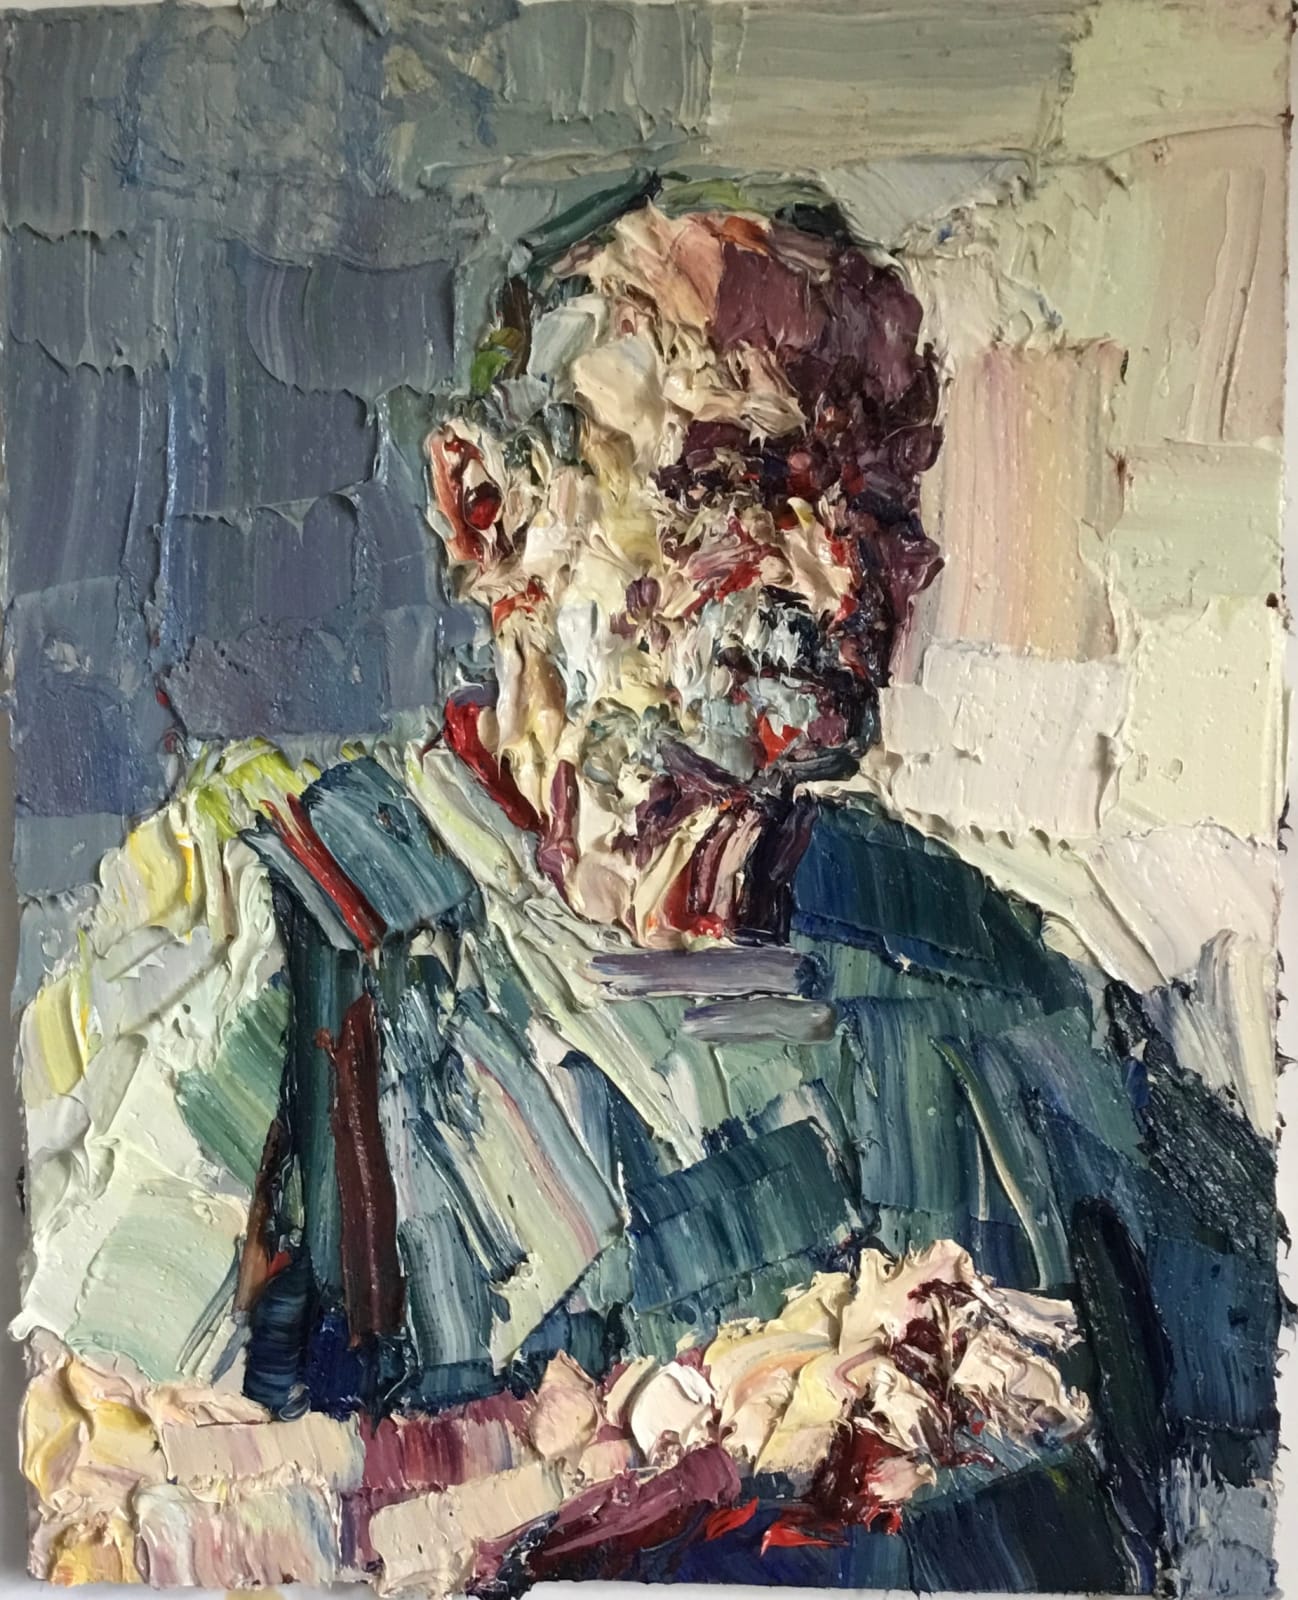 George Rowlett, Self-portrait at 81, Morning and Afternoon Light, 2022